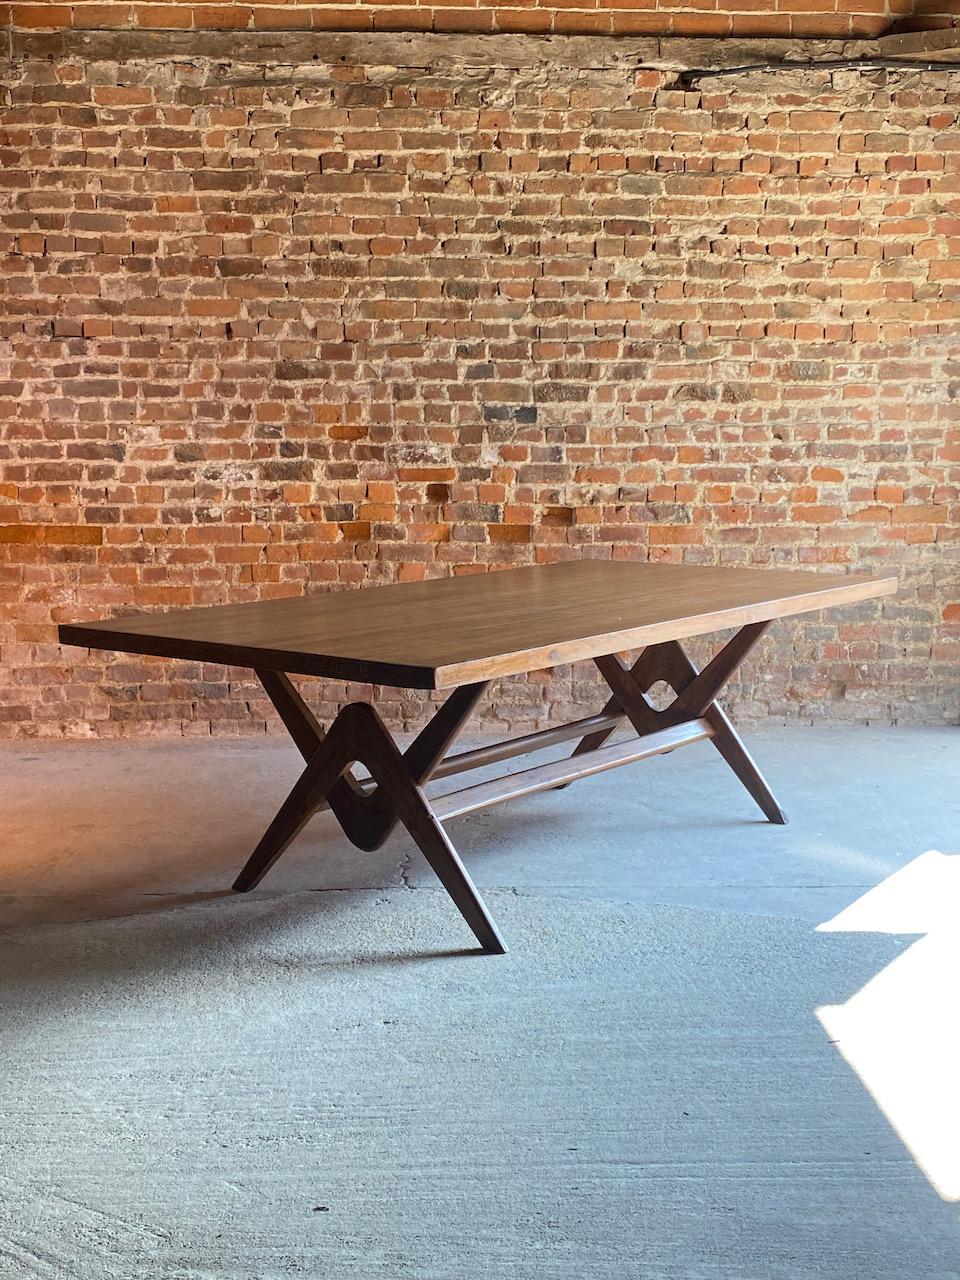 Pierre Jeanneret Committee Table in Teak Chandigarh India Circa 1963-64 10